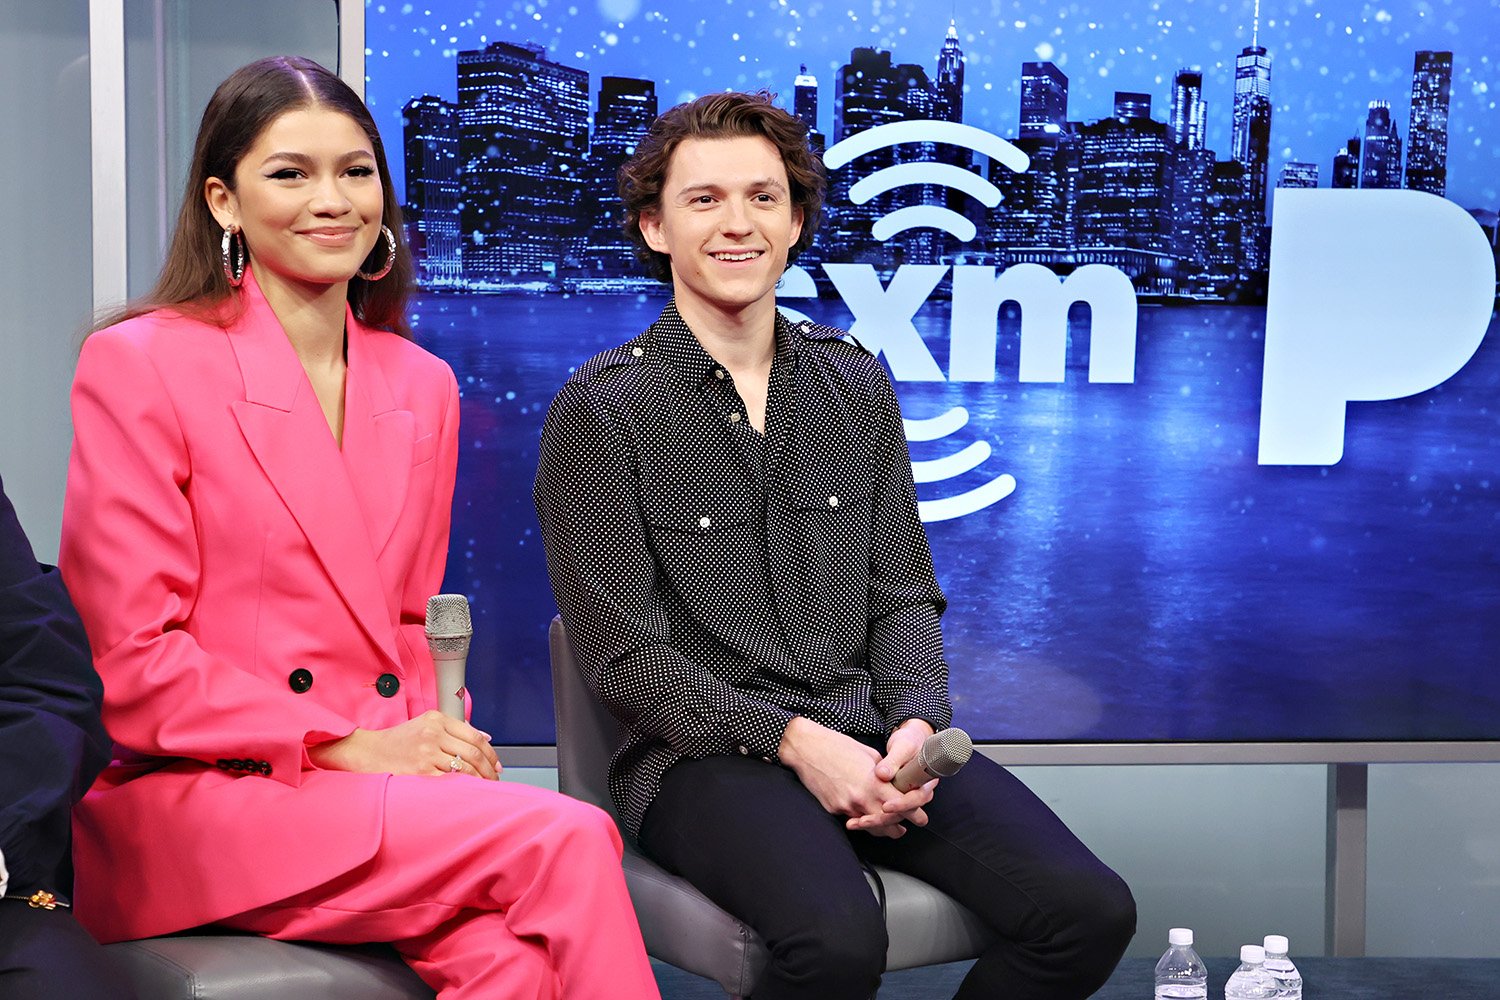 Spider-Man: No Way Home stars Zendaya and Tom Holland talk height differences for SiriusXM's Town Hall